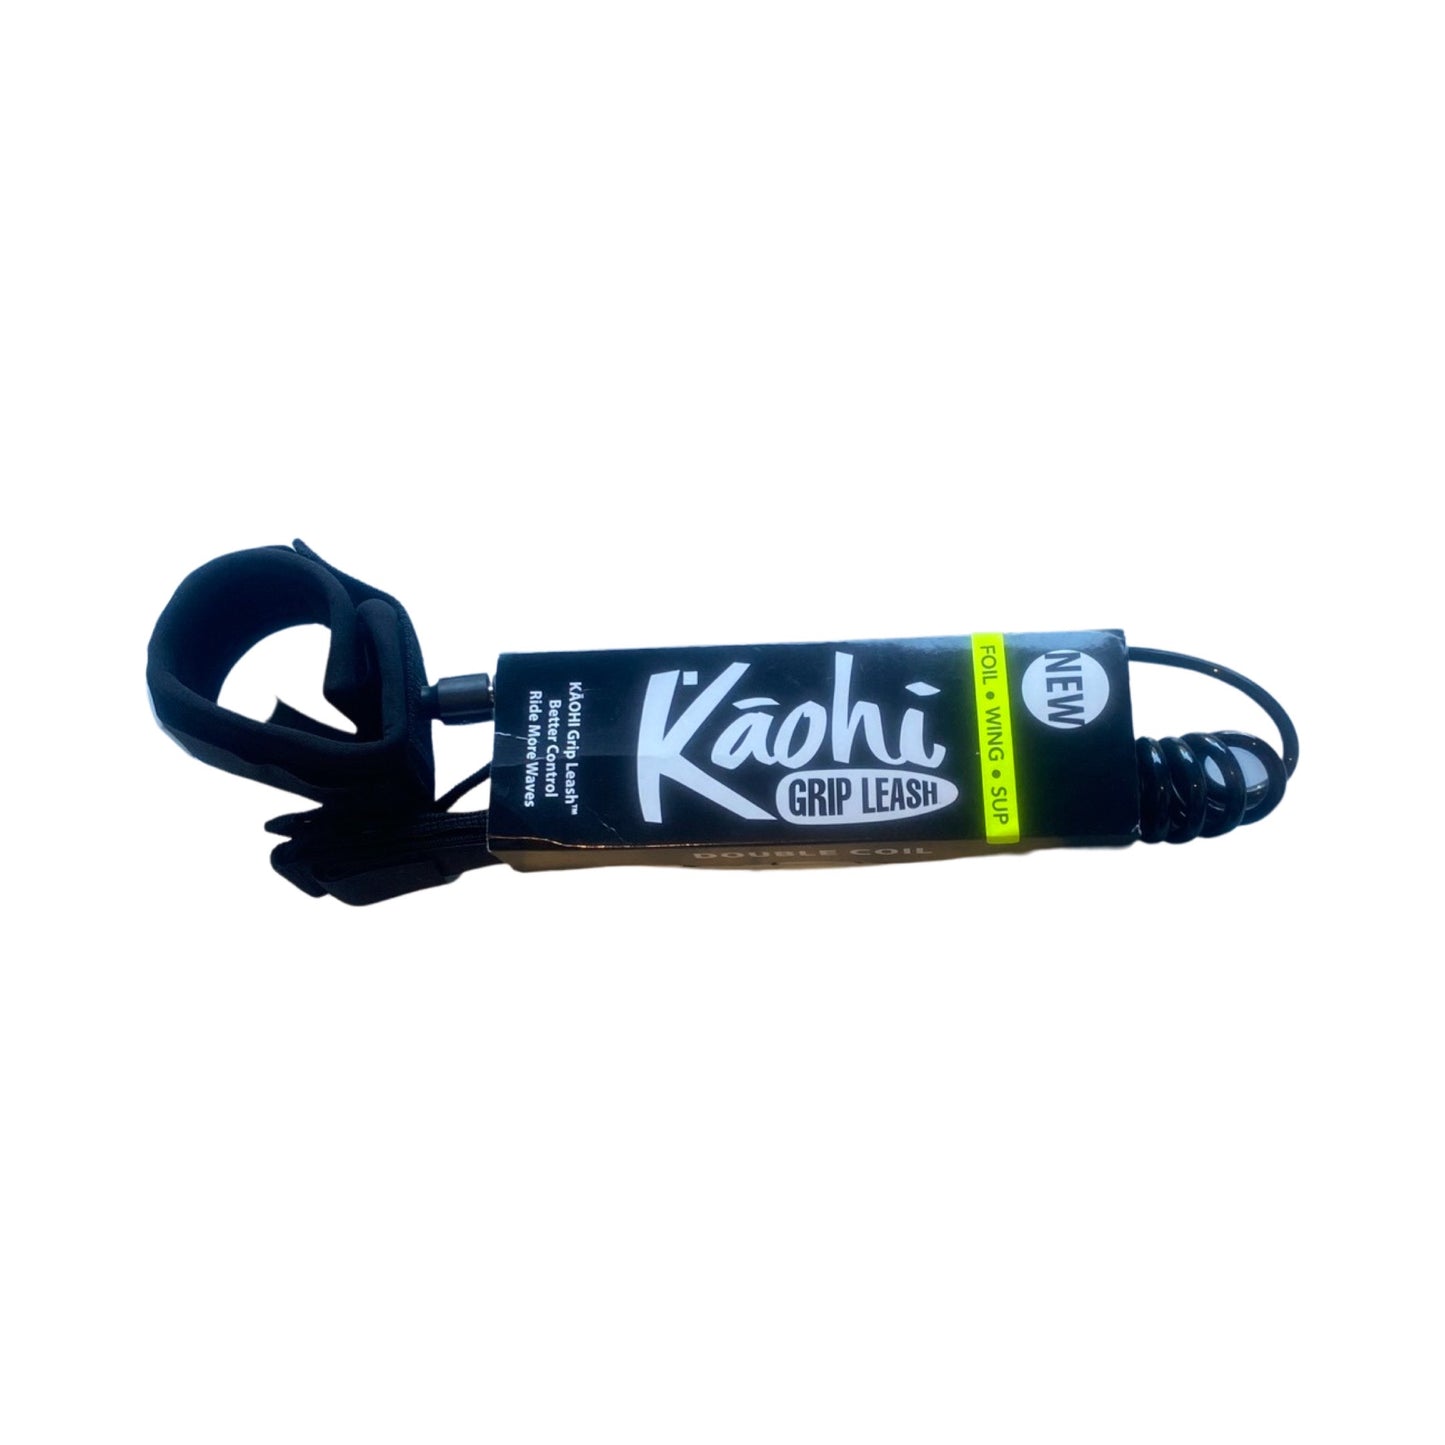 Kaohi - DISCONTINUED- Replaced by COBRA FOIL LEASH